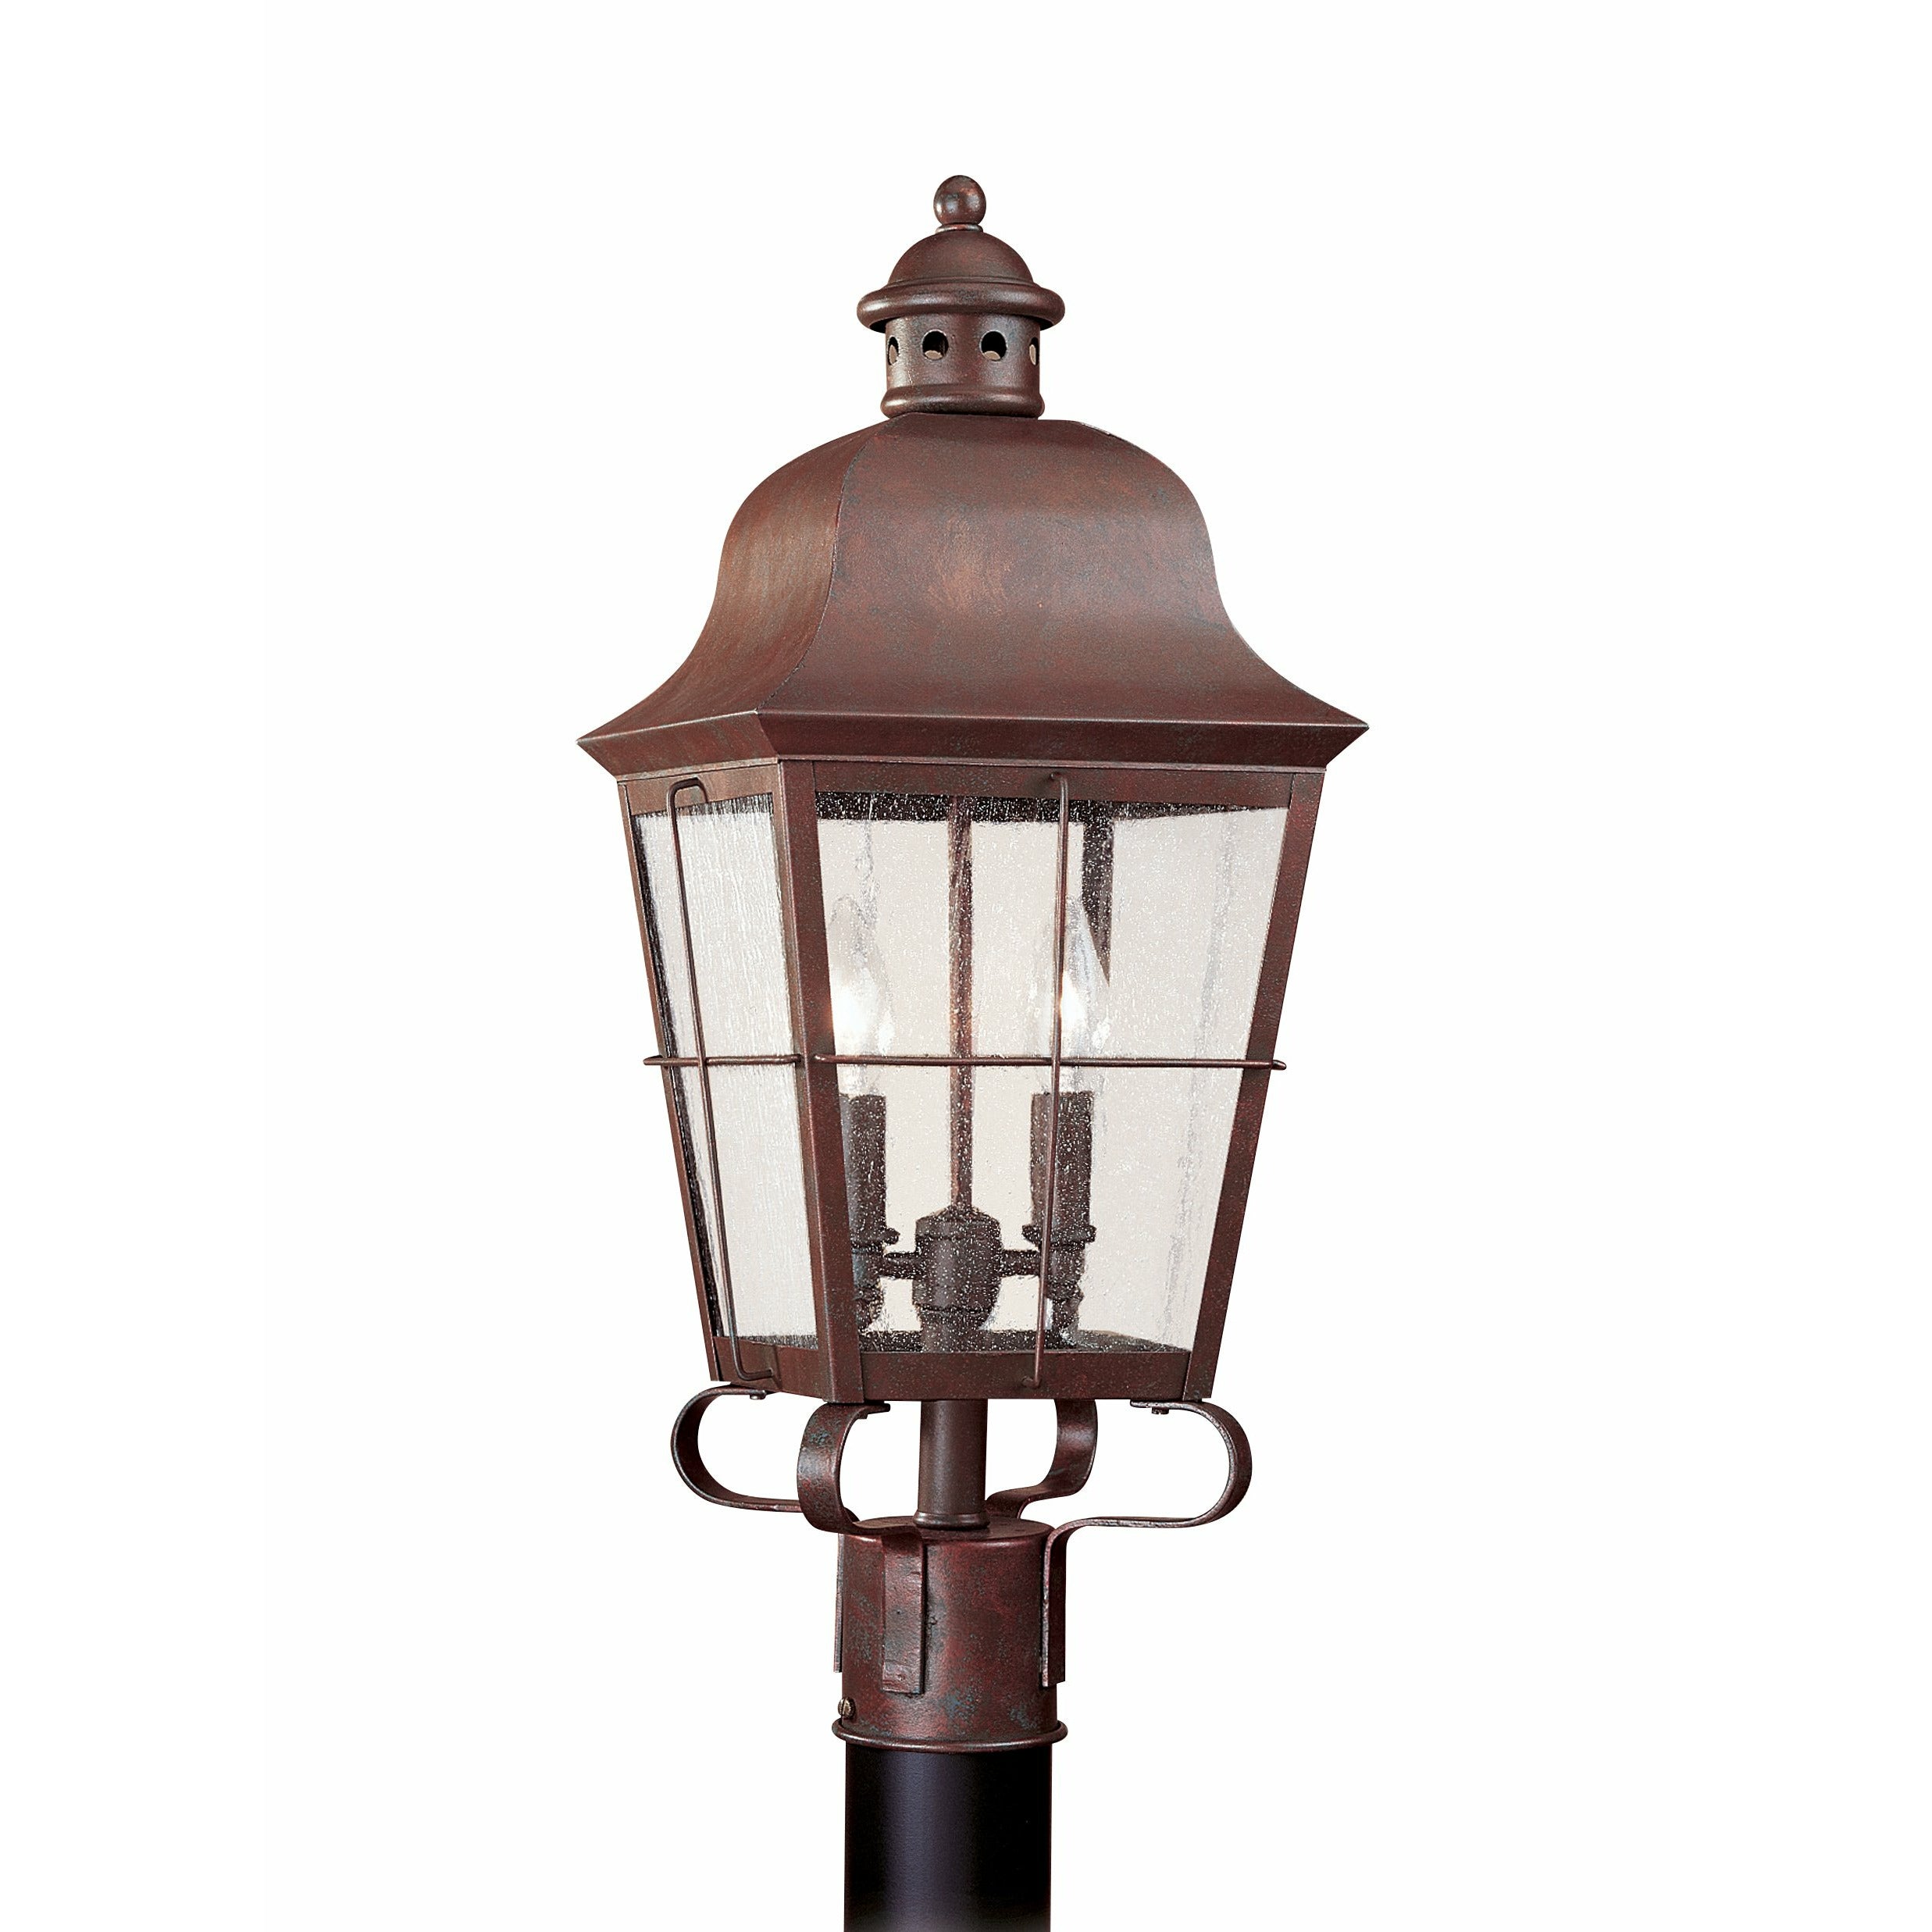 Chatham Post Light Weathered Copper